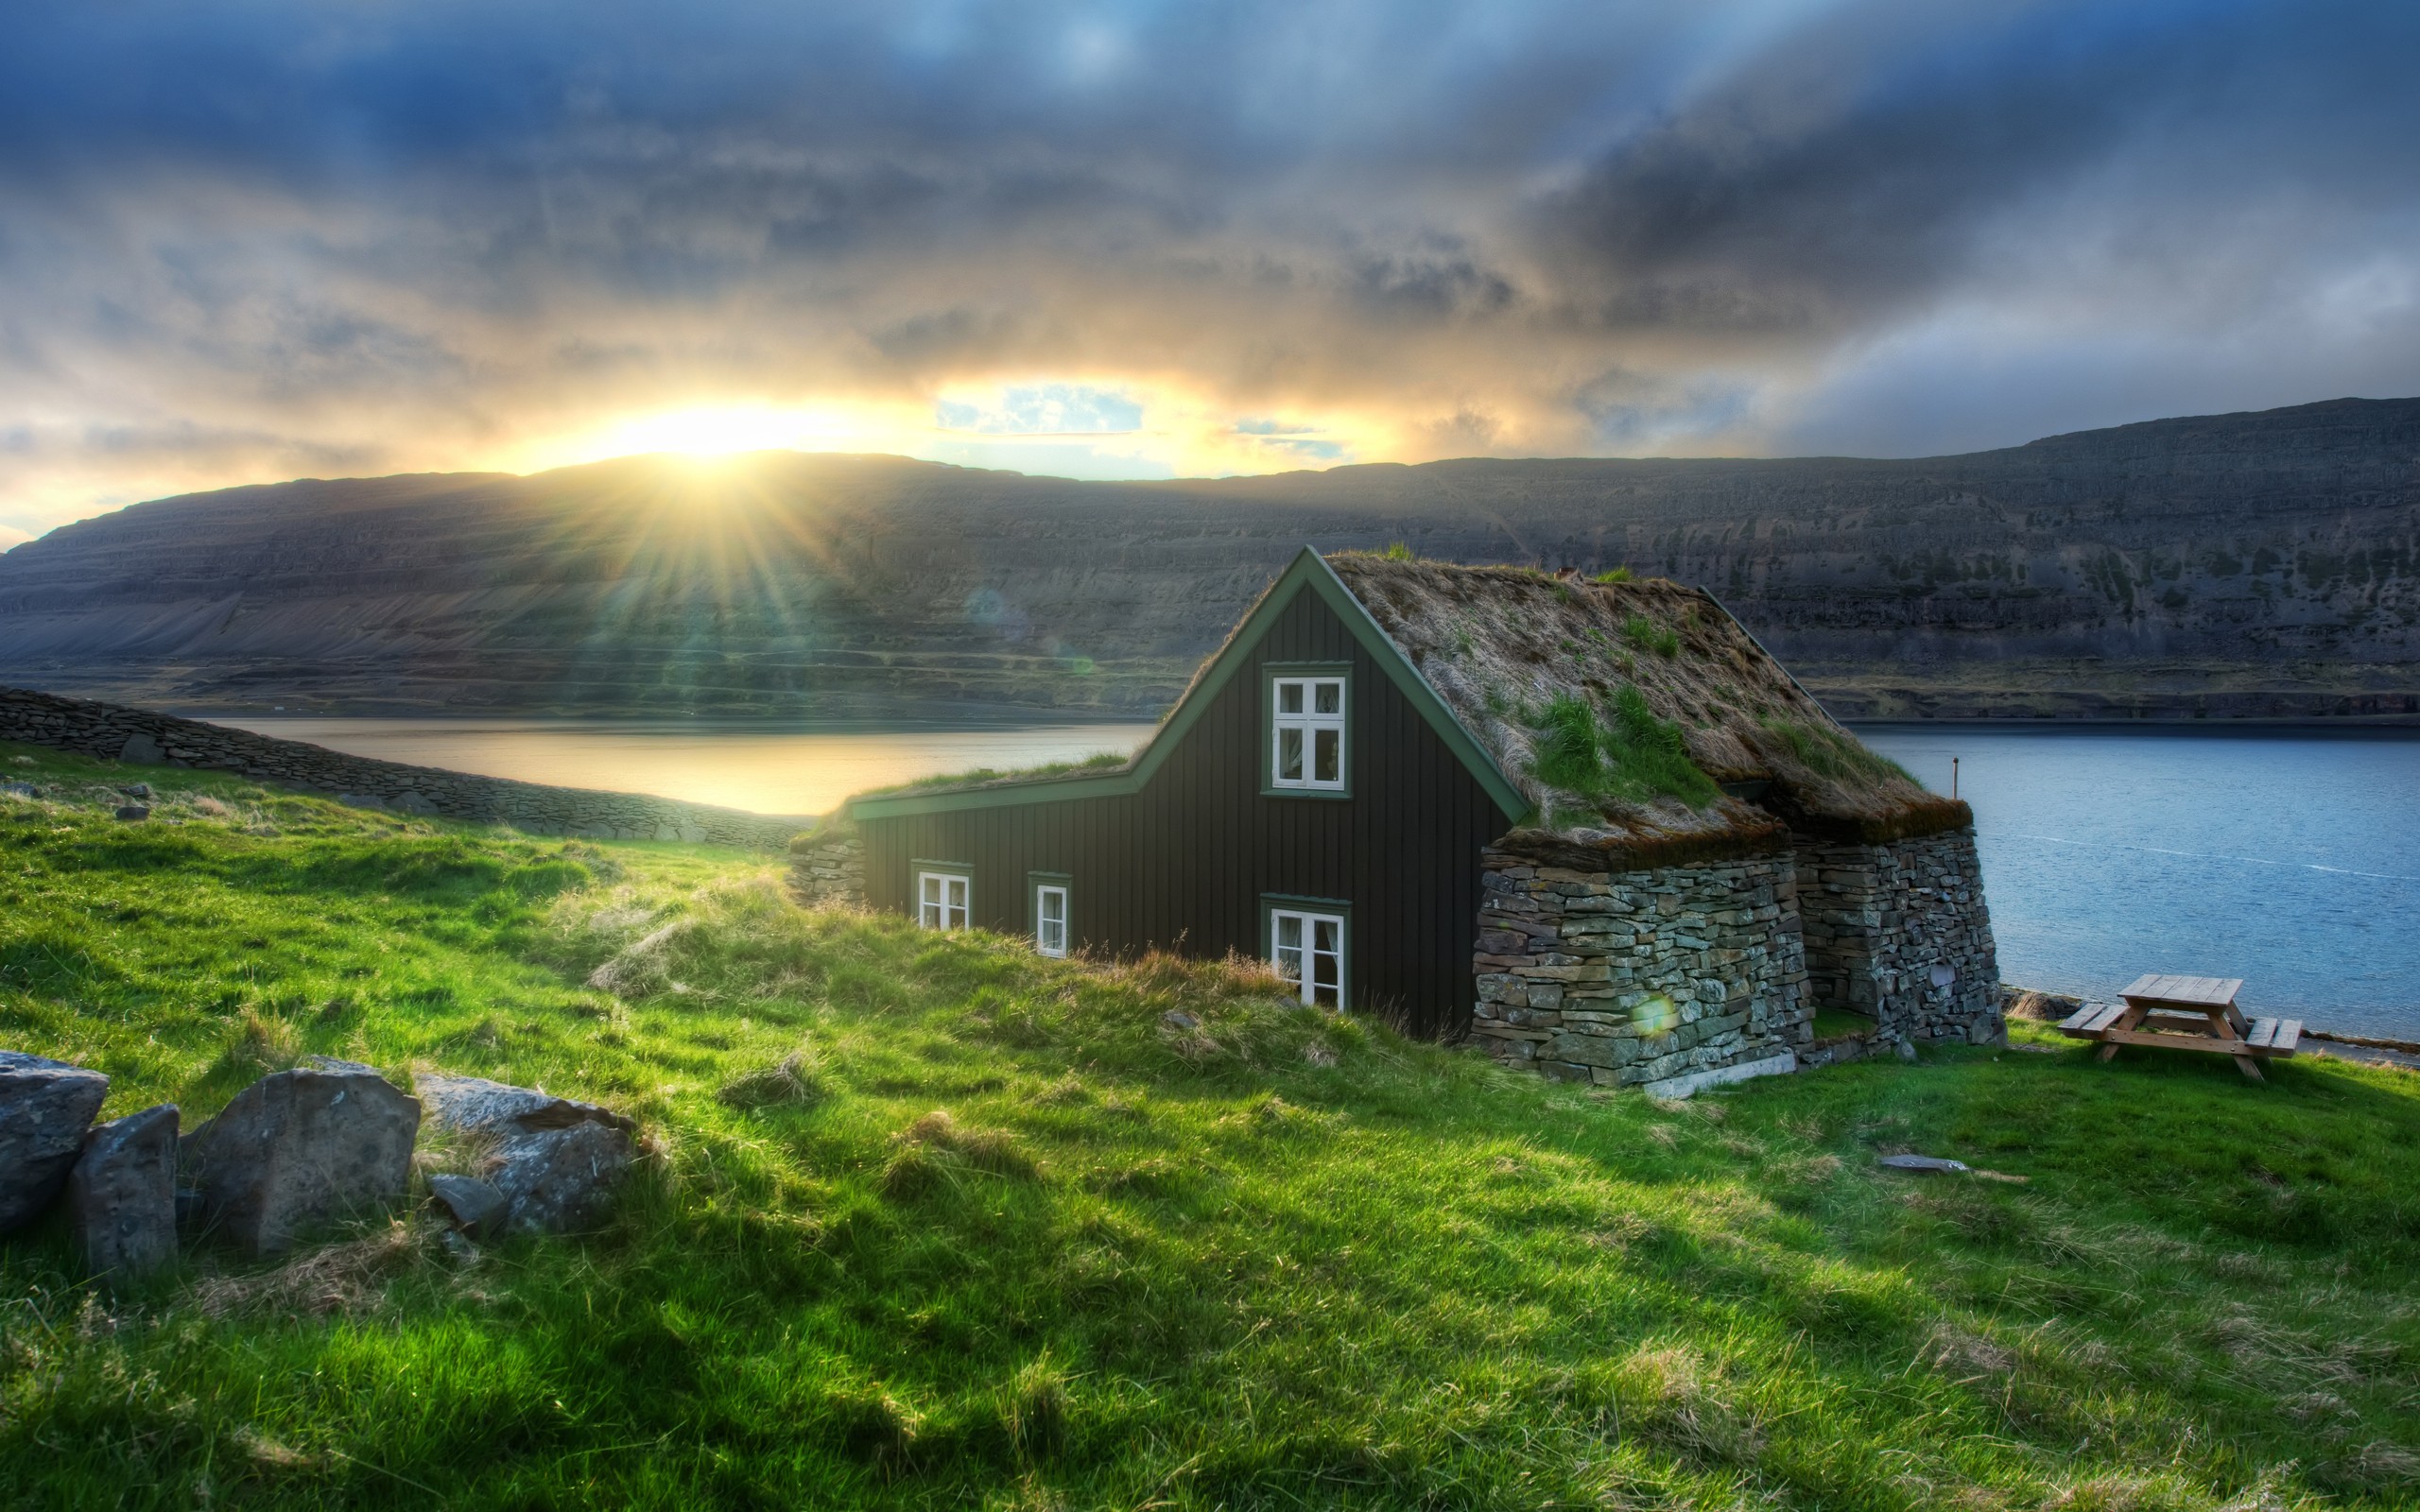 General 2560x1600 nature landscape sunset river HDR sunlight house Iceland cottage sun rays outdoors